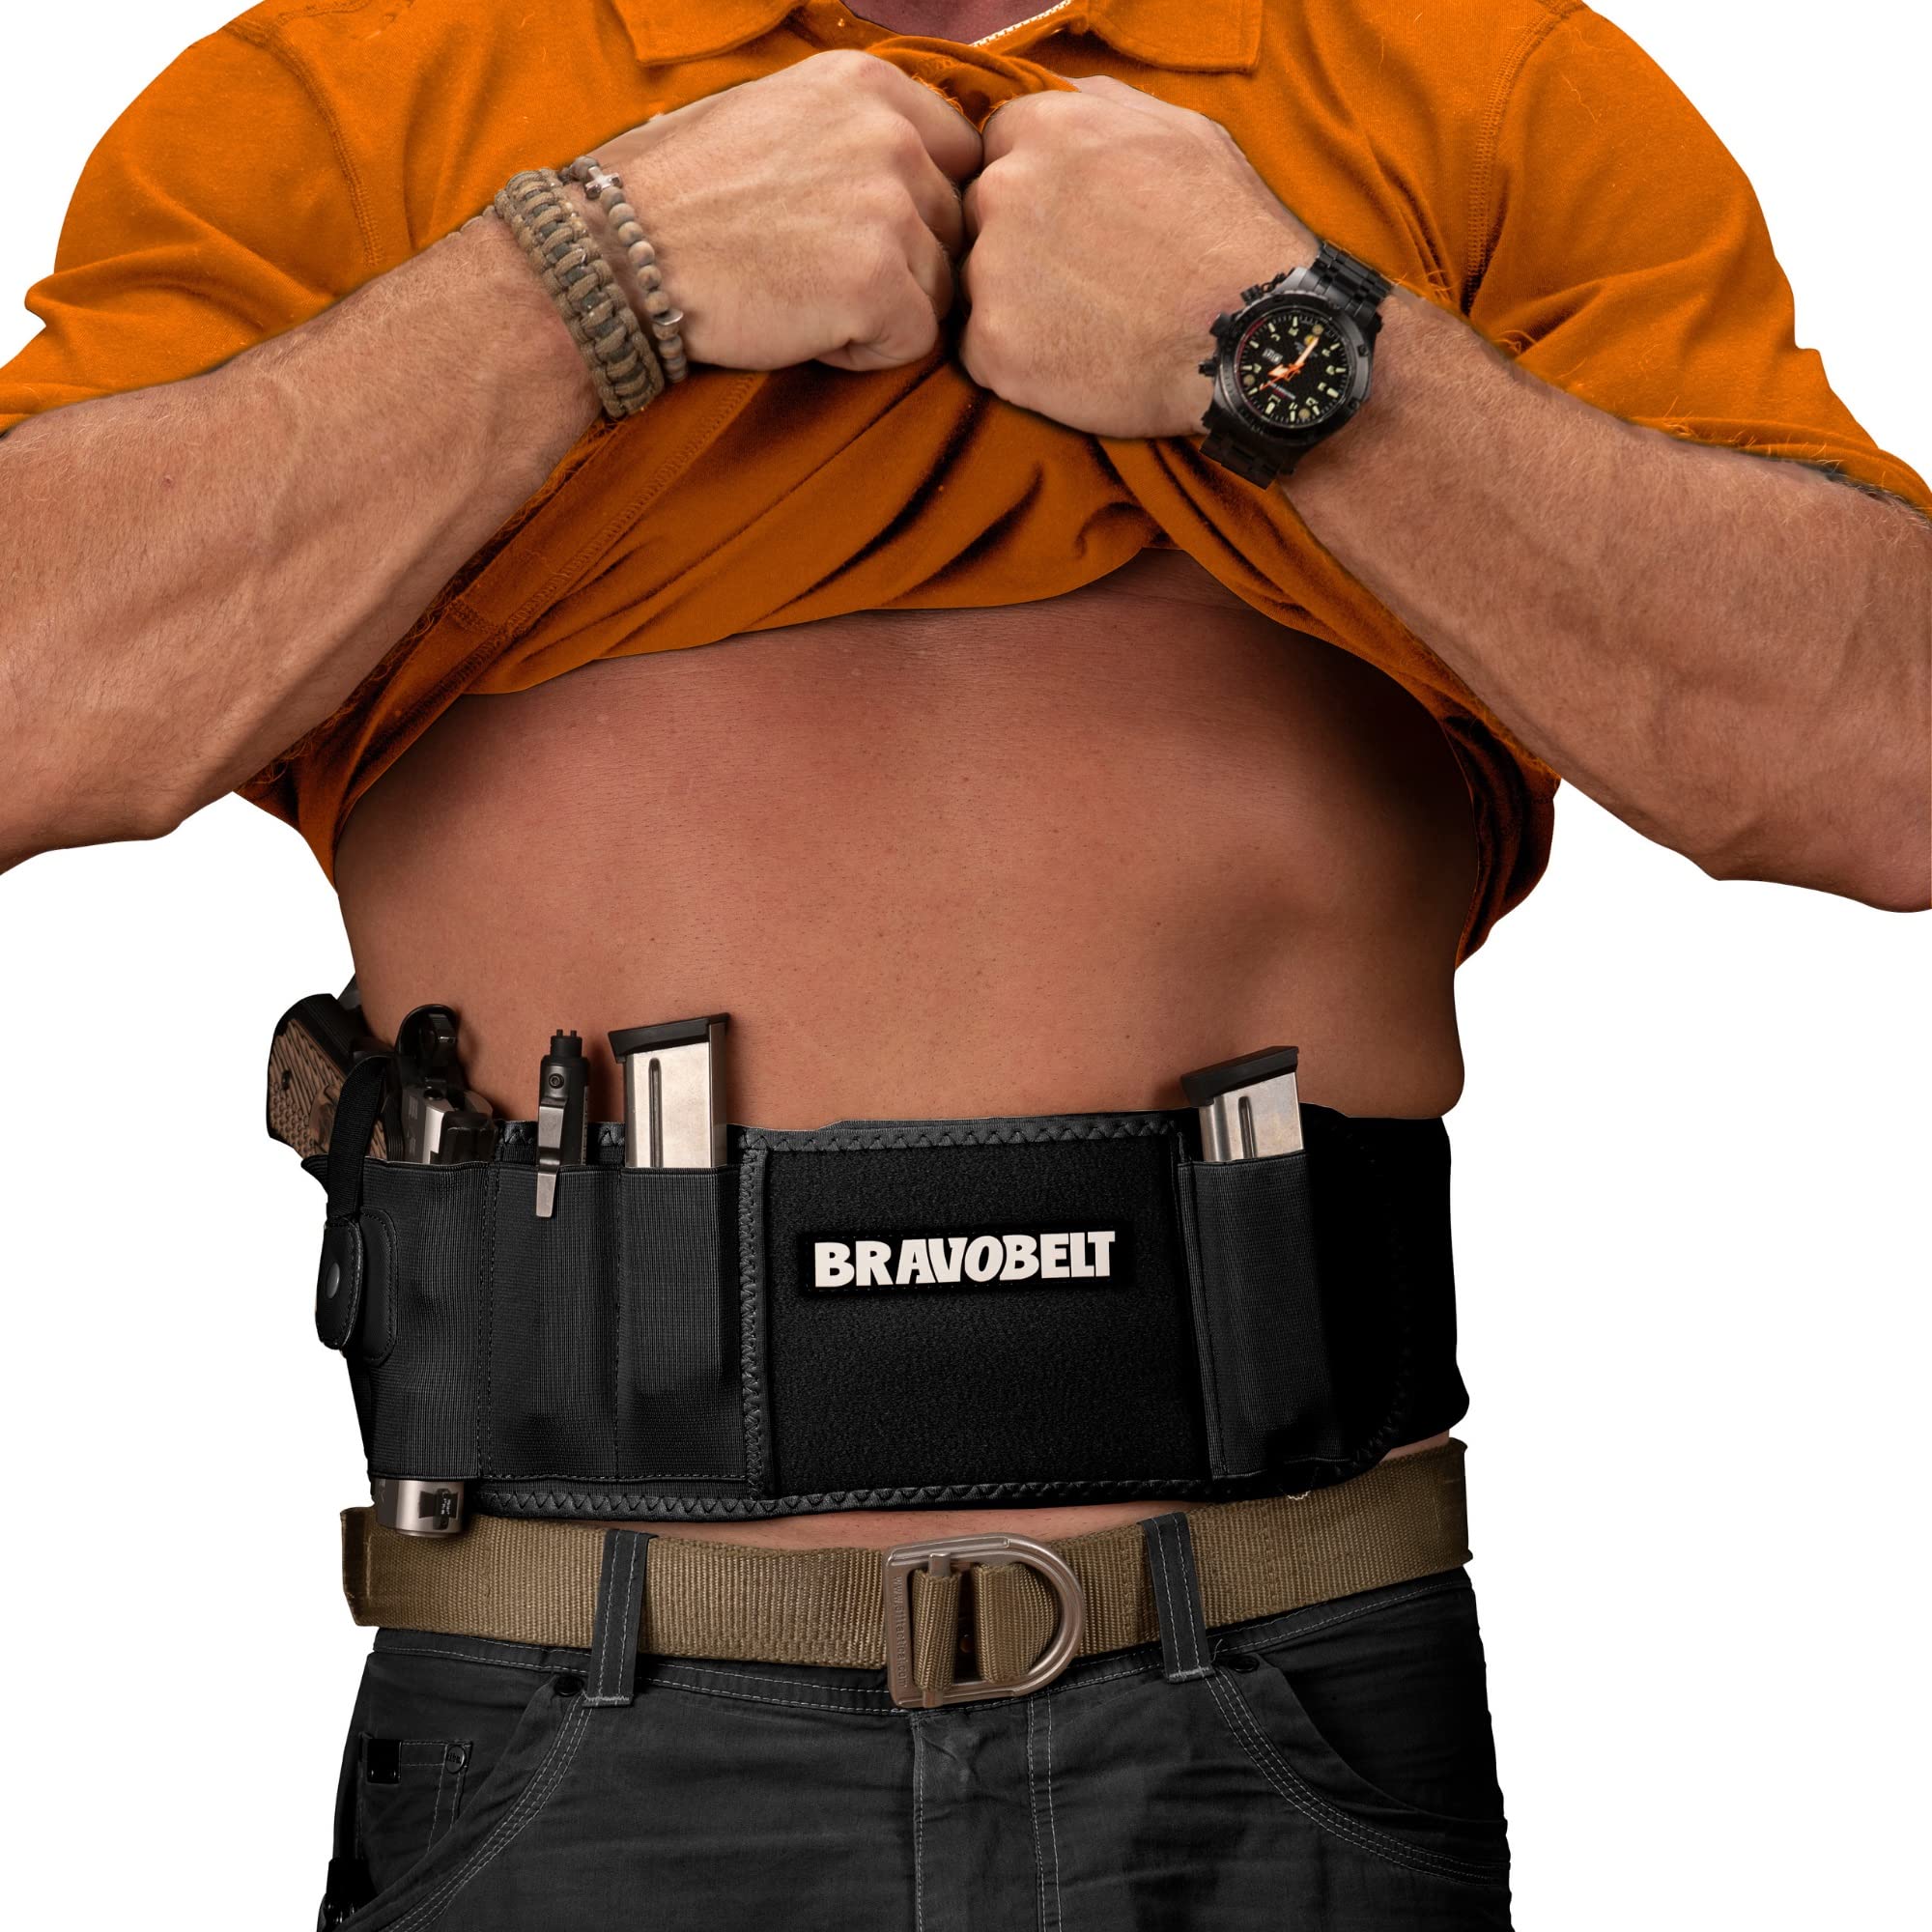 BRAVOBELT Belly Band Holster for Concealed Carry - Athletic Flex FIT for  Running, Jogging, Hiking - Glock 17-43 Ruger S&W M&P 40 Shield